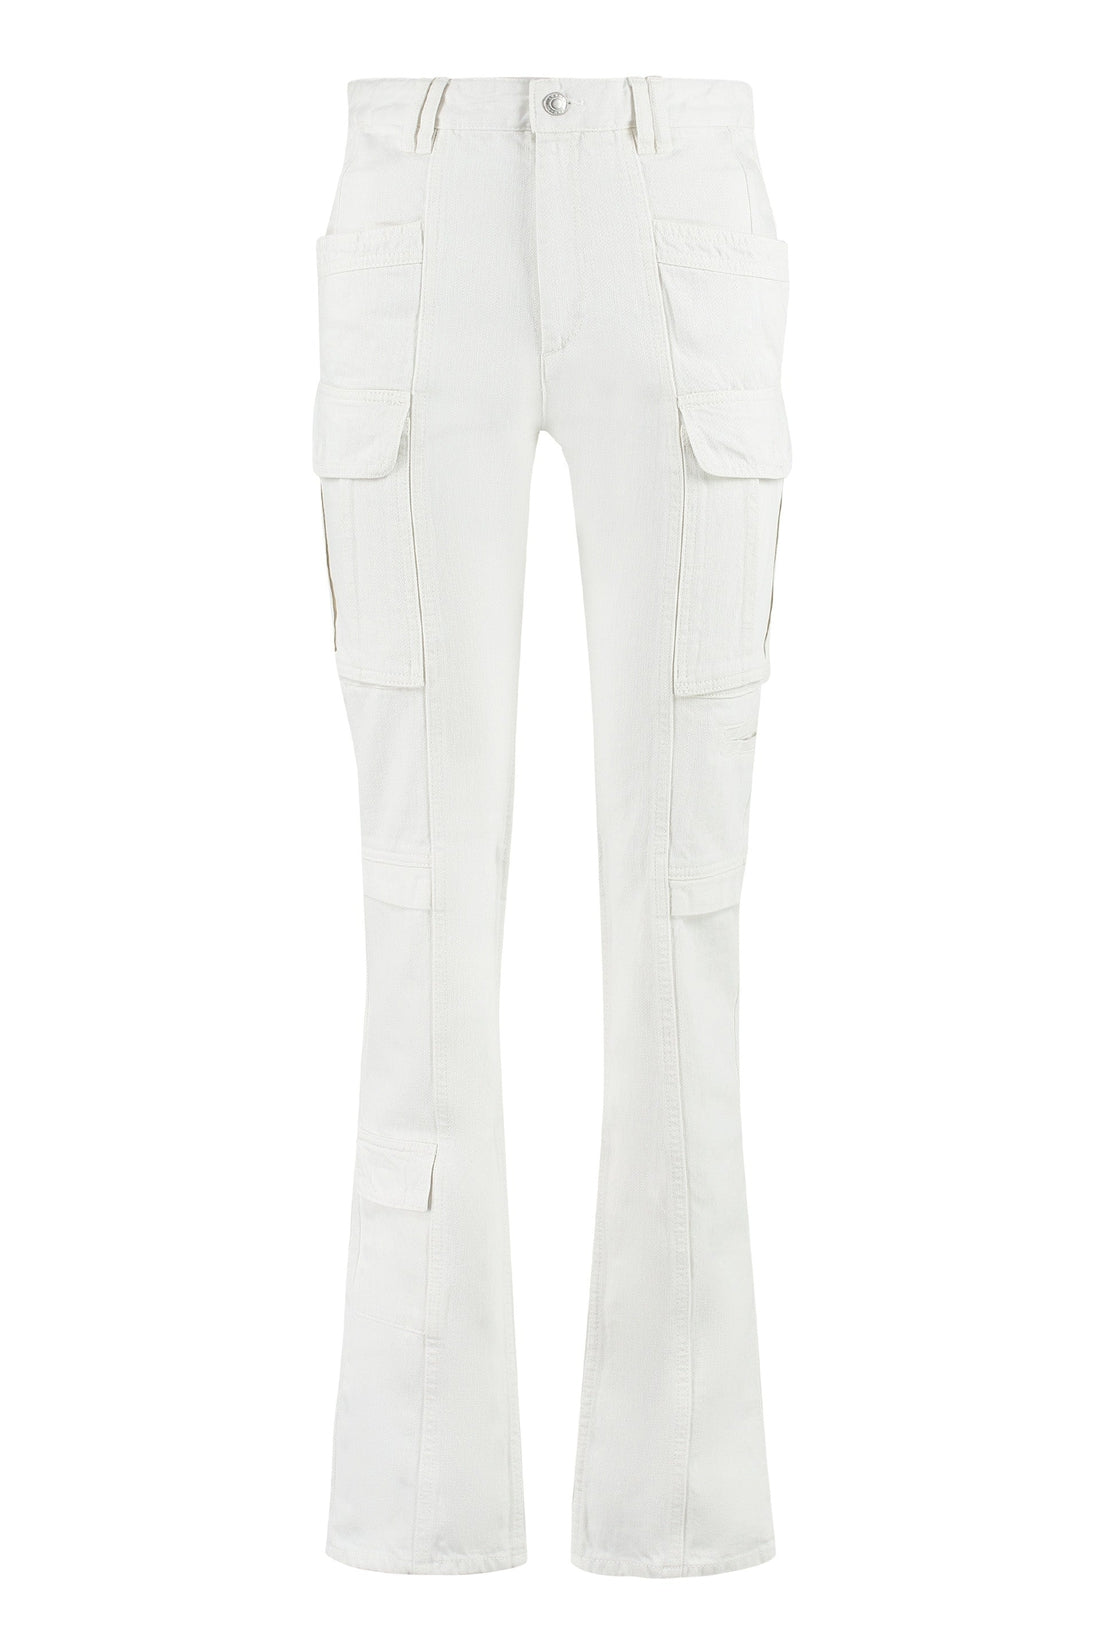 Isabel Marant-OUTLET-SALE-Vokayo cotton cargo-trousers-ARCHIVIST